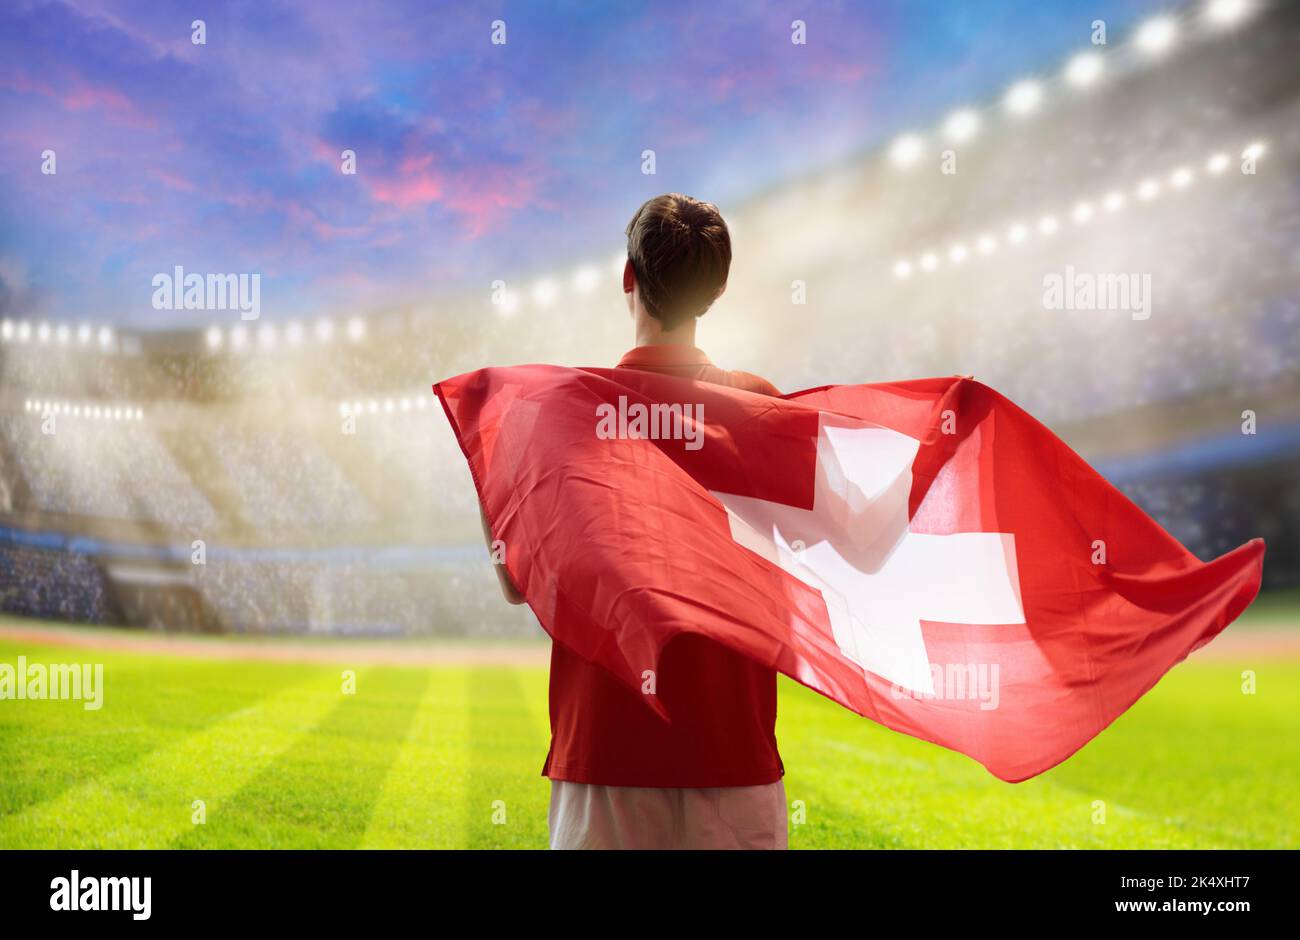 Switzerland football supporter on stadium. Swiss fan on soccer pitch watching team play. Young player with flag and national jersey Stock Photo